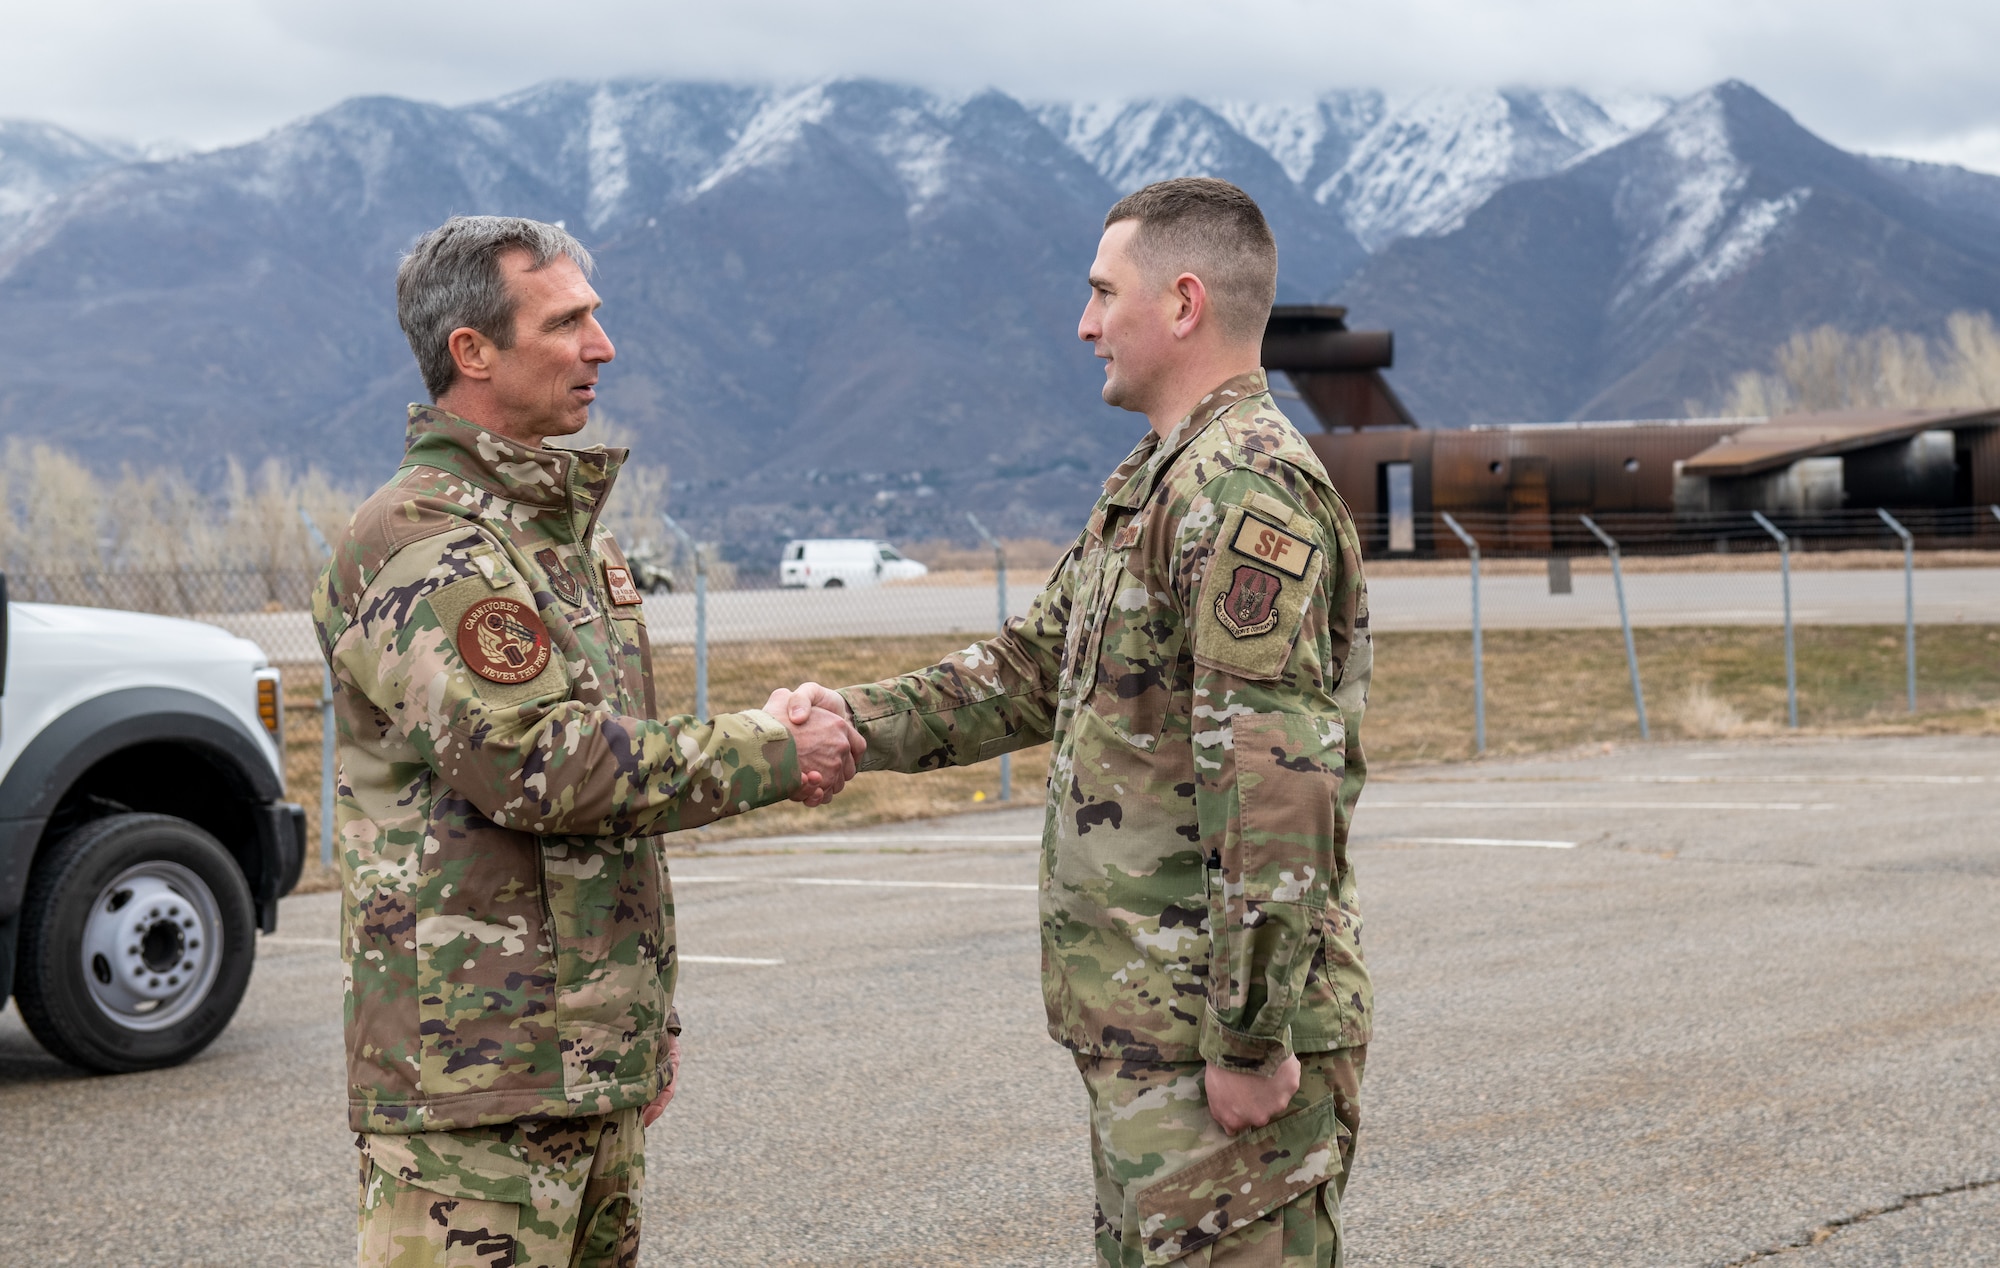 Maj. Gen. Bryan Radliff, 10th Air Force commander, presents a coin to Tech. Sgt. Robert Osmond, 419th Security Forces Squadron, during a tour of the 419th Fighter Wing